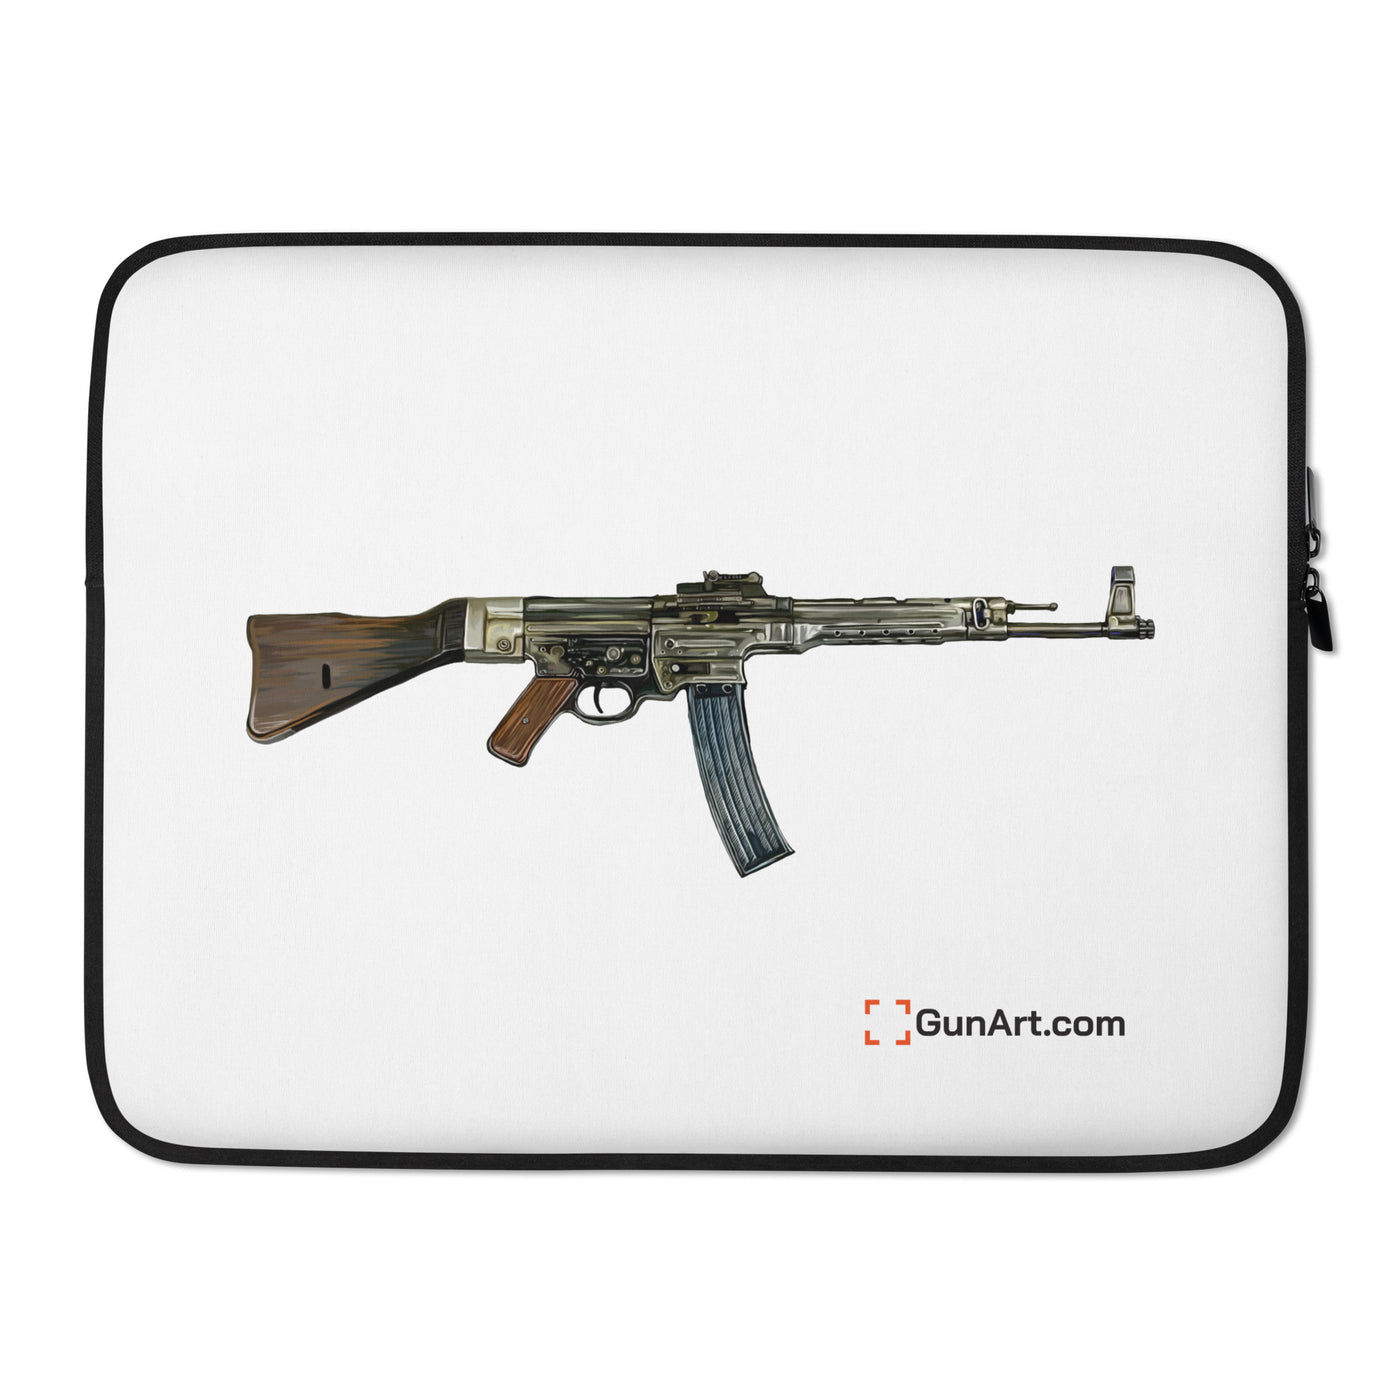 WWII German Assault Rifle Laptop Sleeve - Just The Piece - White Background